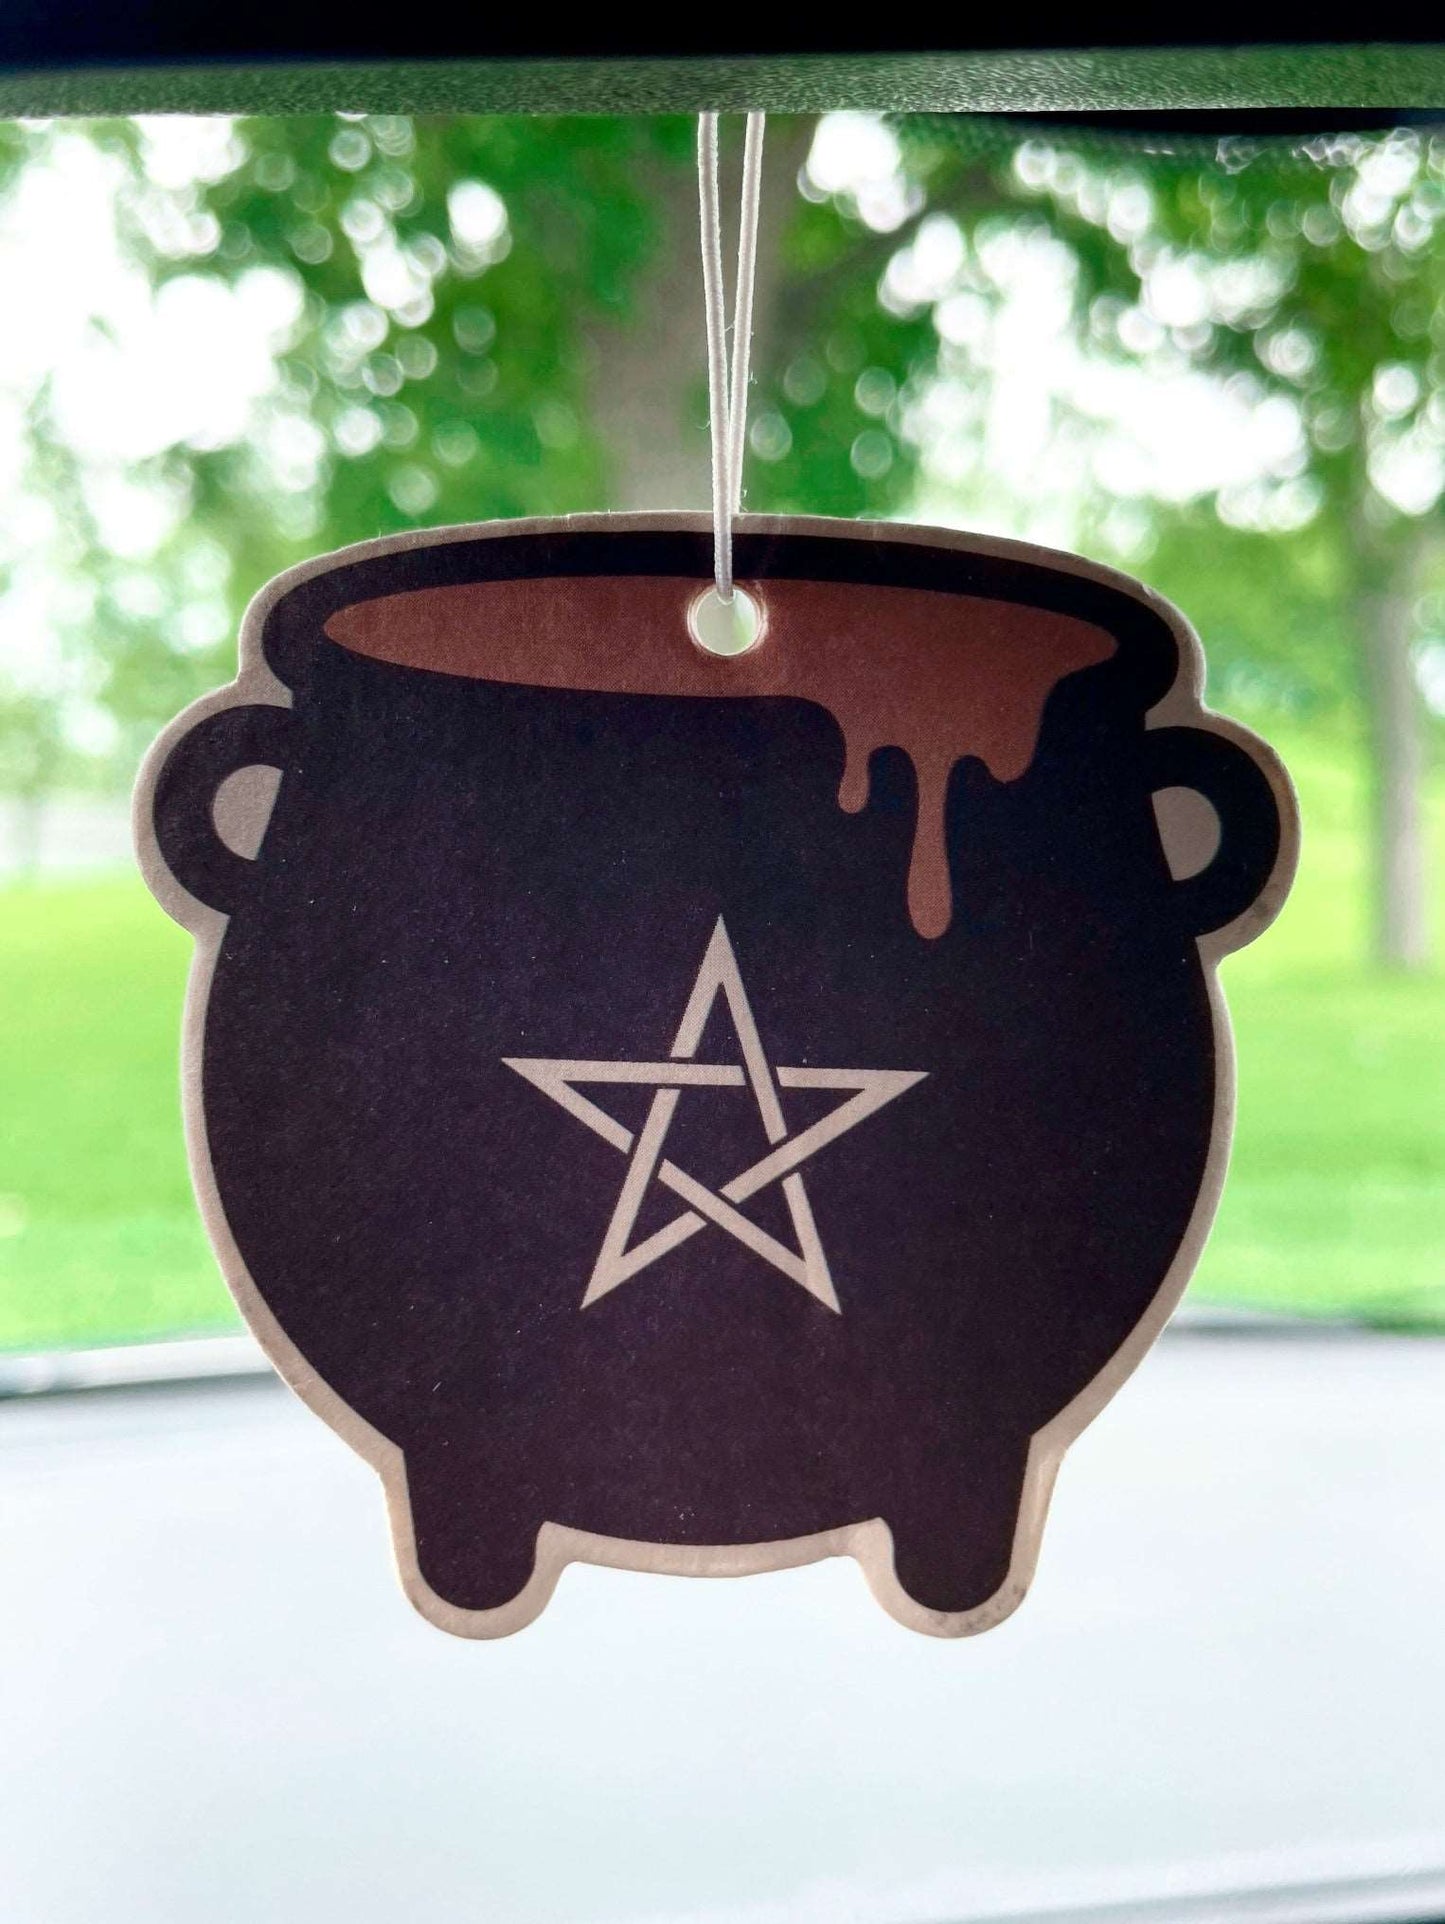 Pictured is an air freshener in the shape of a cauldron.